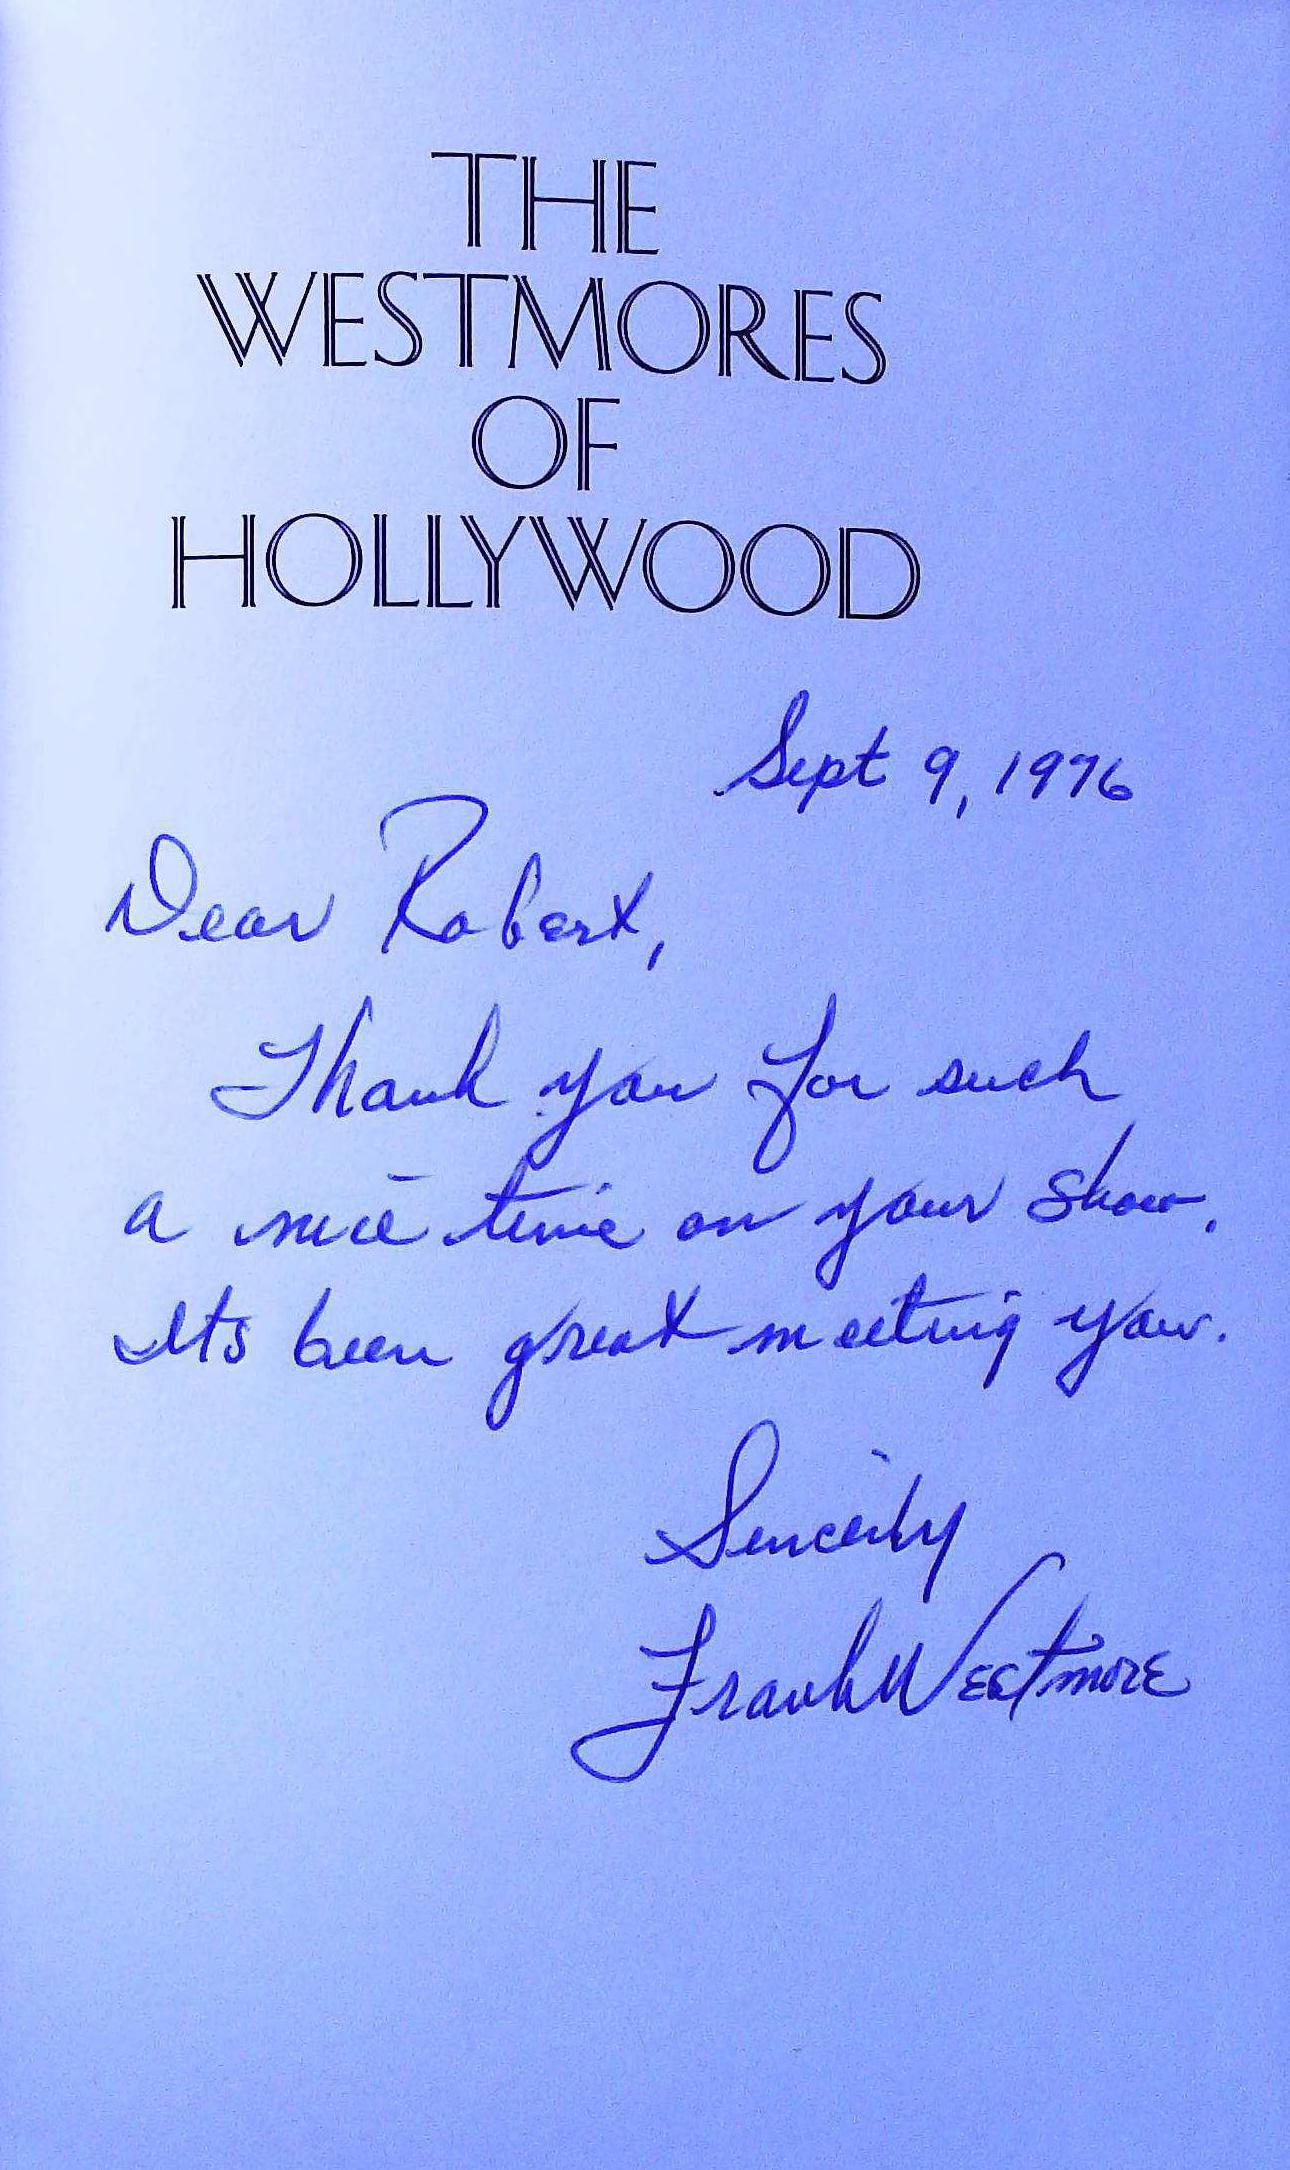 The Westmores Of Hollywood hardback book by Frank Westmore and Muriel Davidson, signed by author, - Image 3 of 3